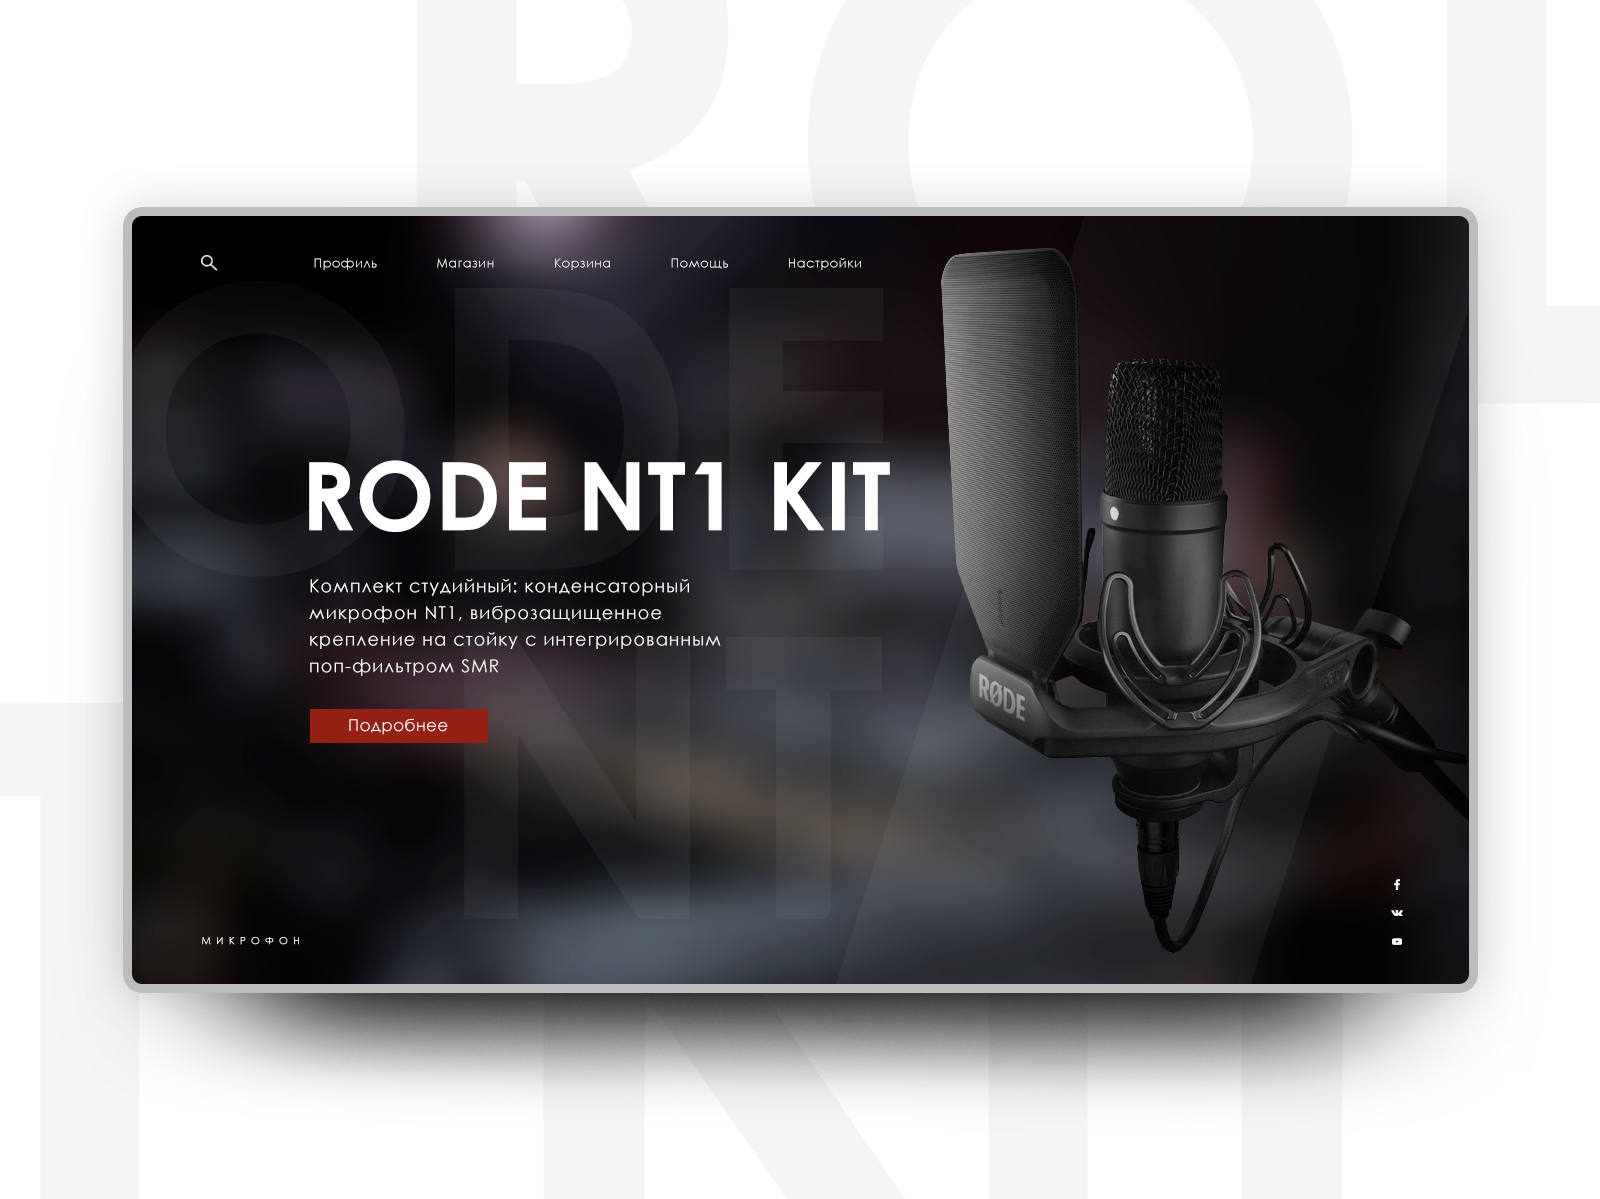 RODE NT1 Kit by Rise on Dribbble